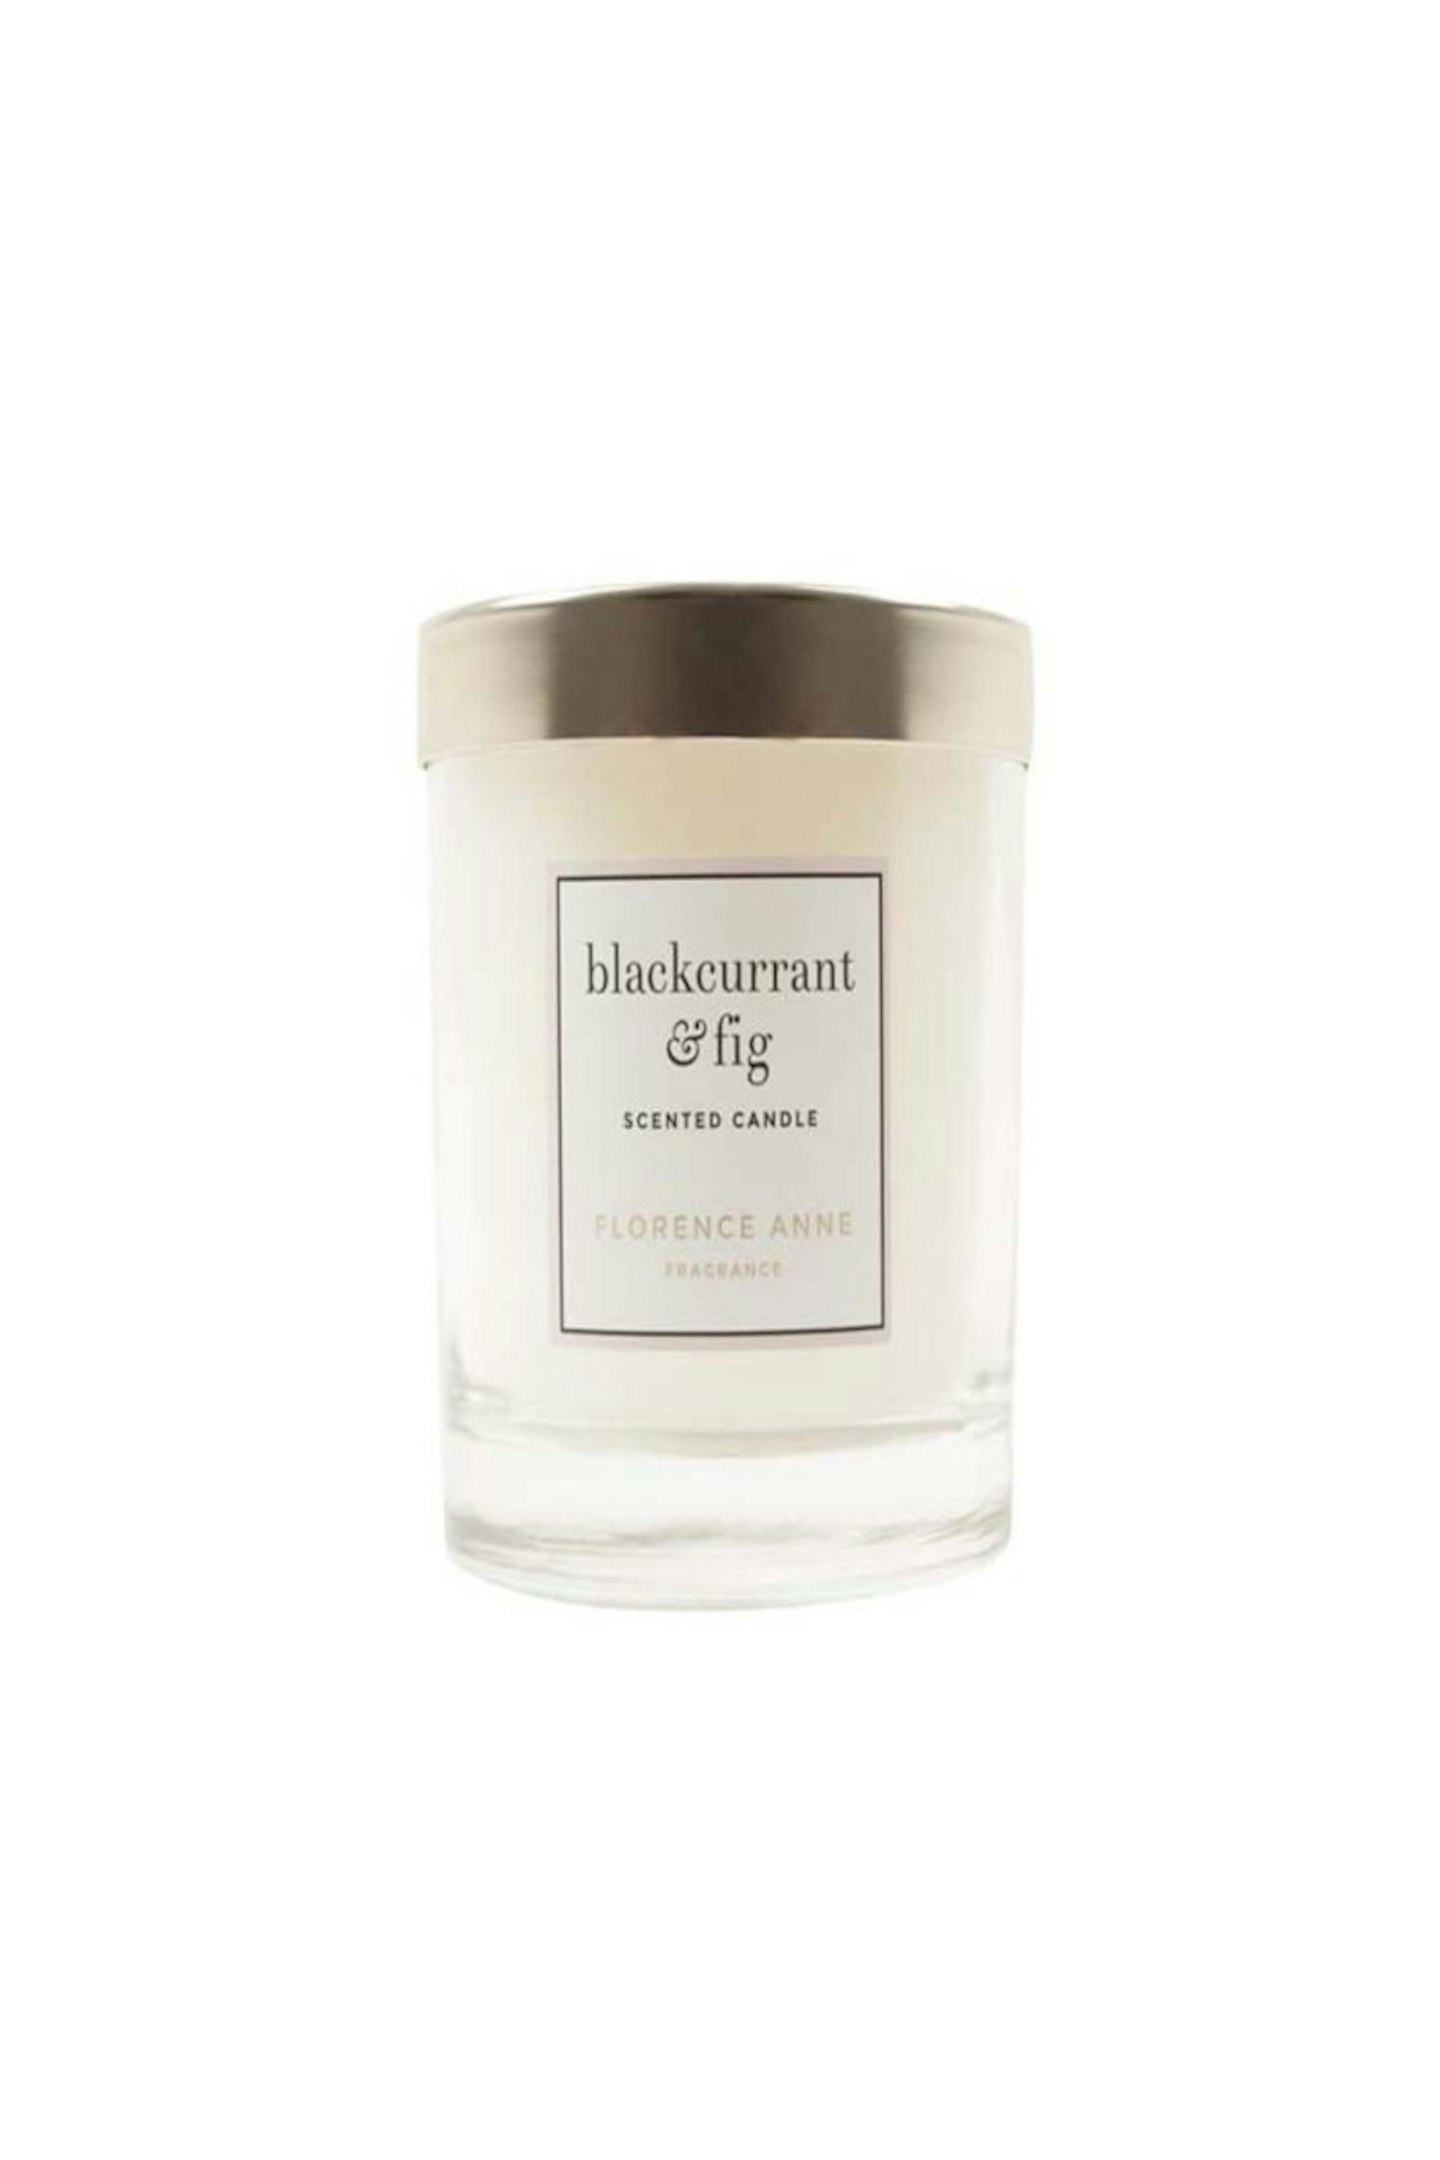 Florence Anne Fig & Blackcurrant Candle.